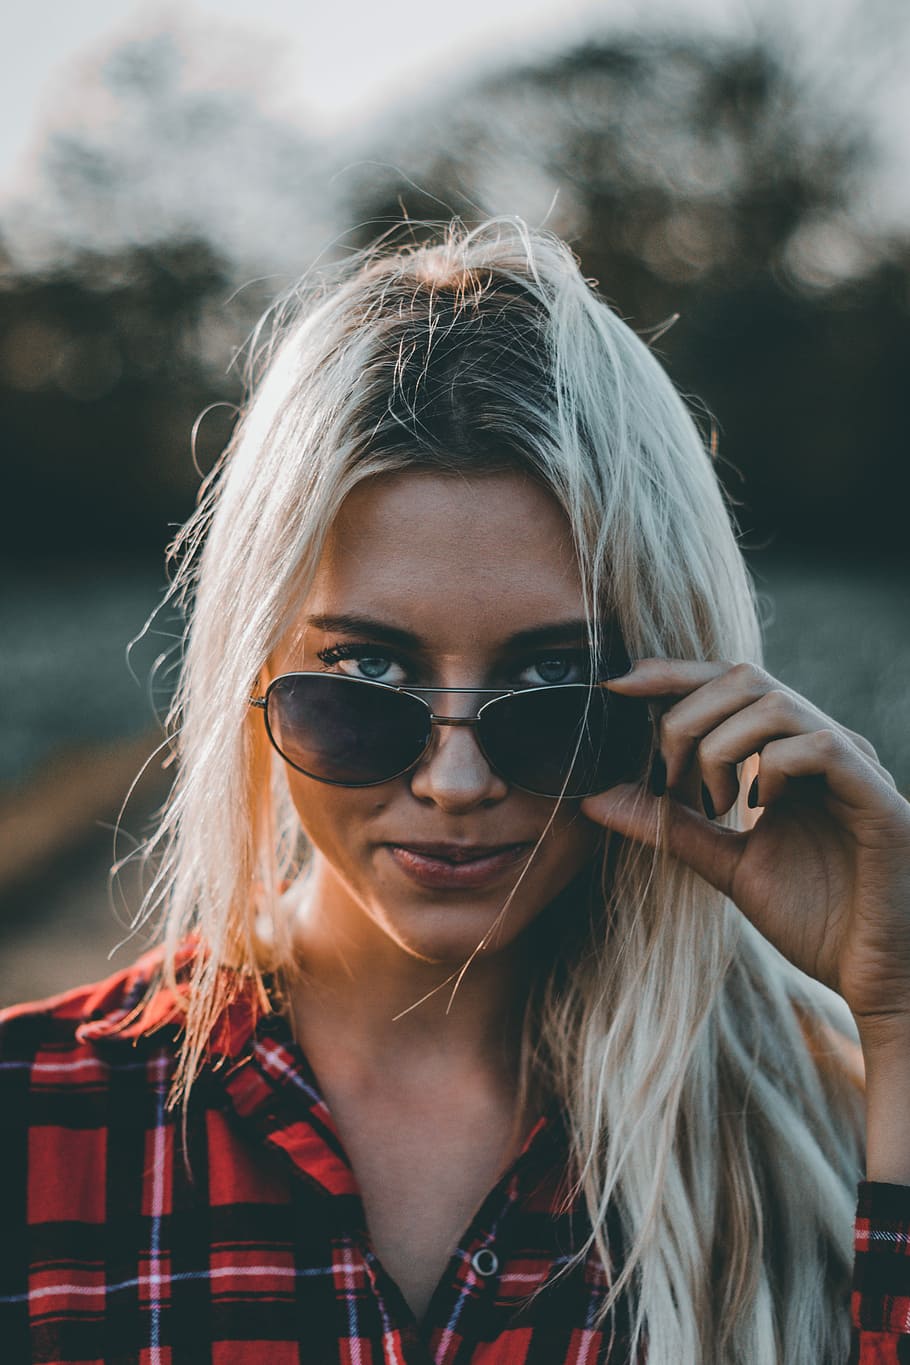 woman wearing red and black plaid top holding sunglasses, woman holding her sunglasses in selective focus photography